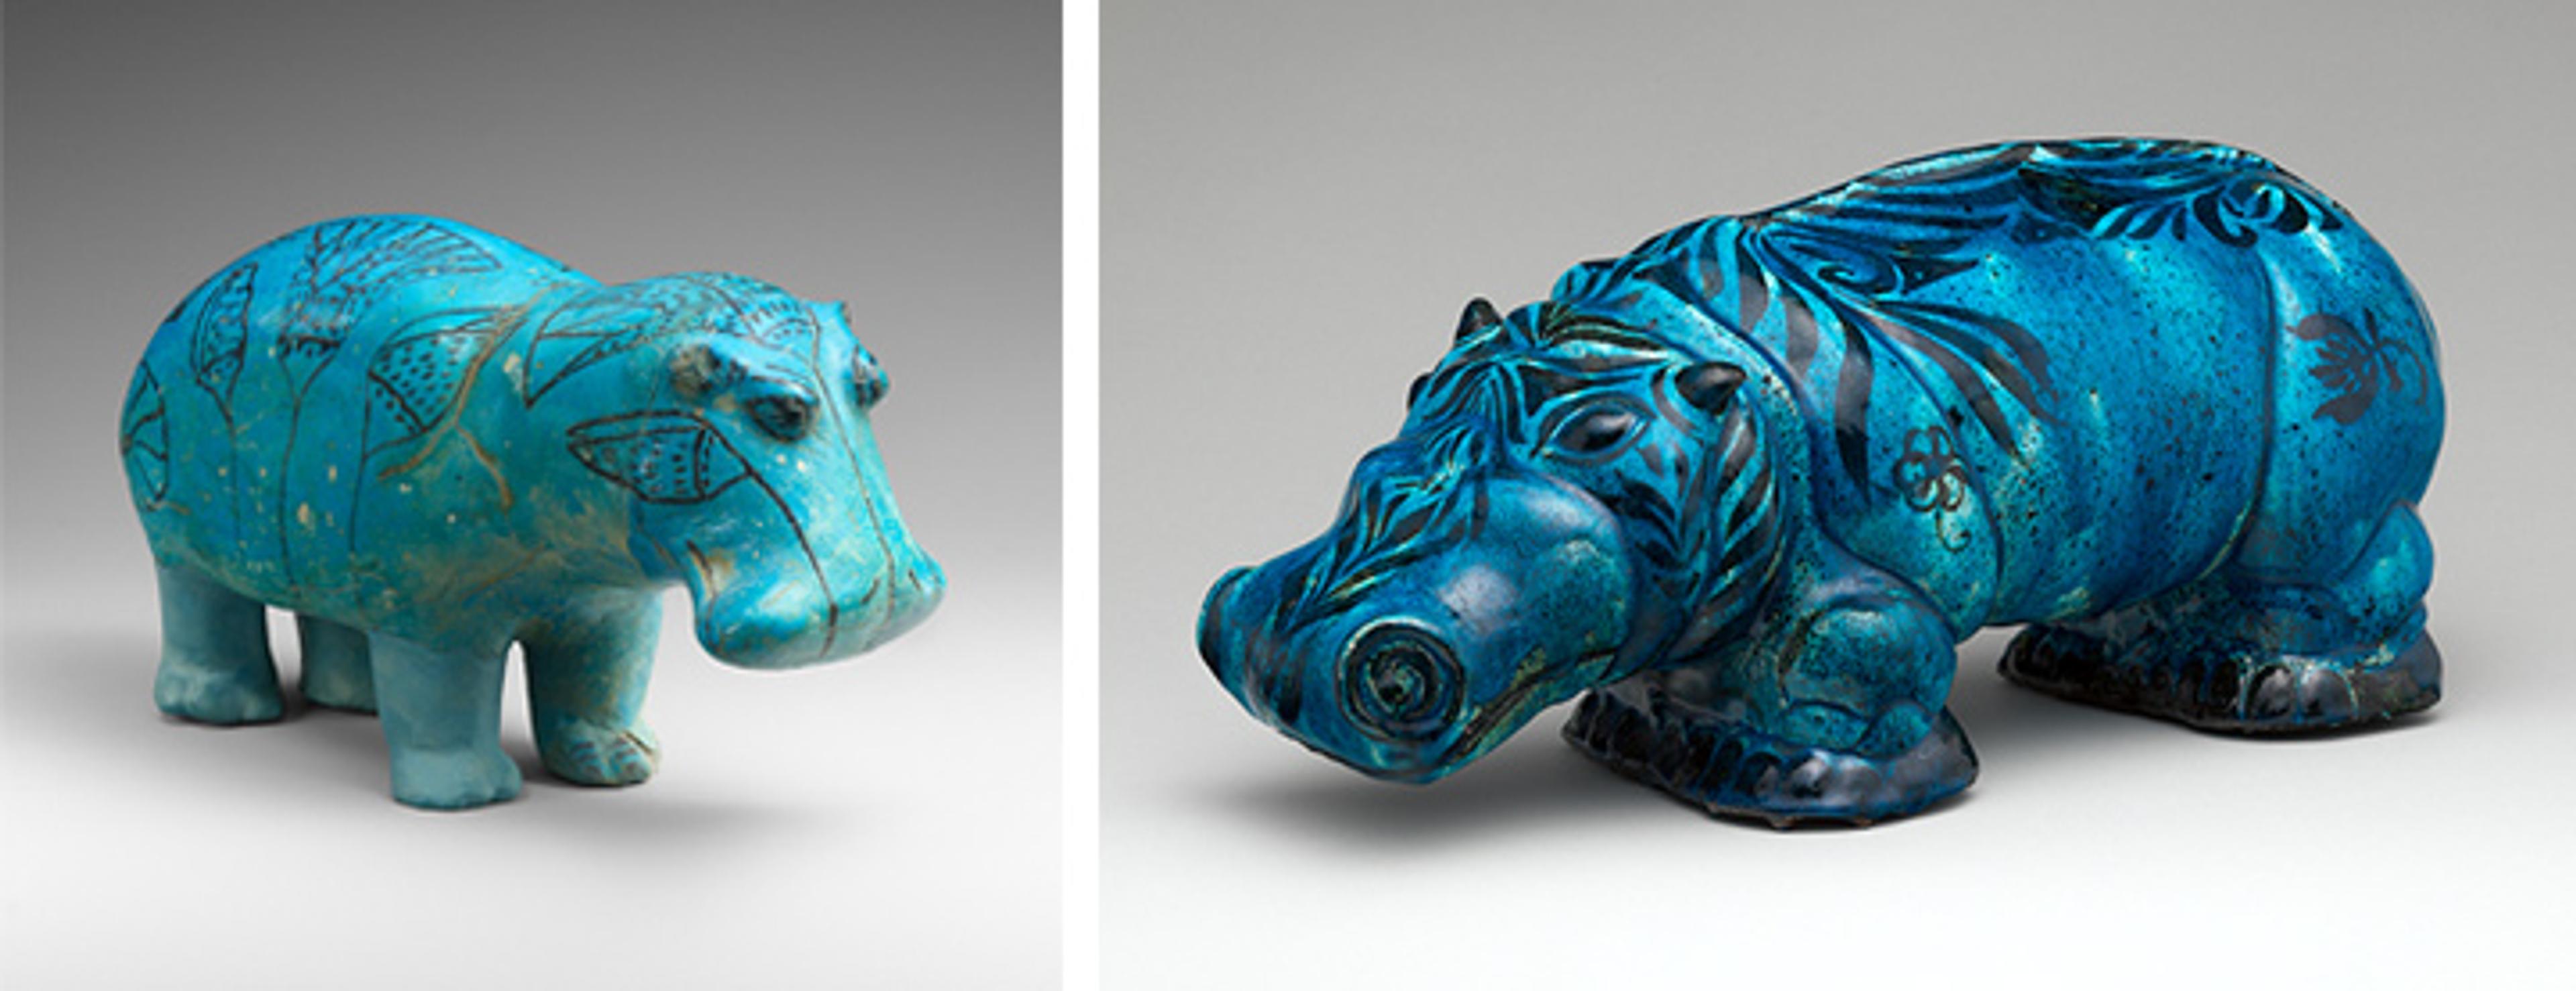 The Met's unofficial mascot, William the hippo on the left, and Carl W. Walter's blue hippo on the right. 